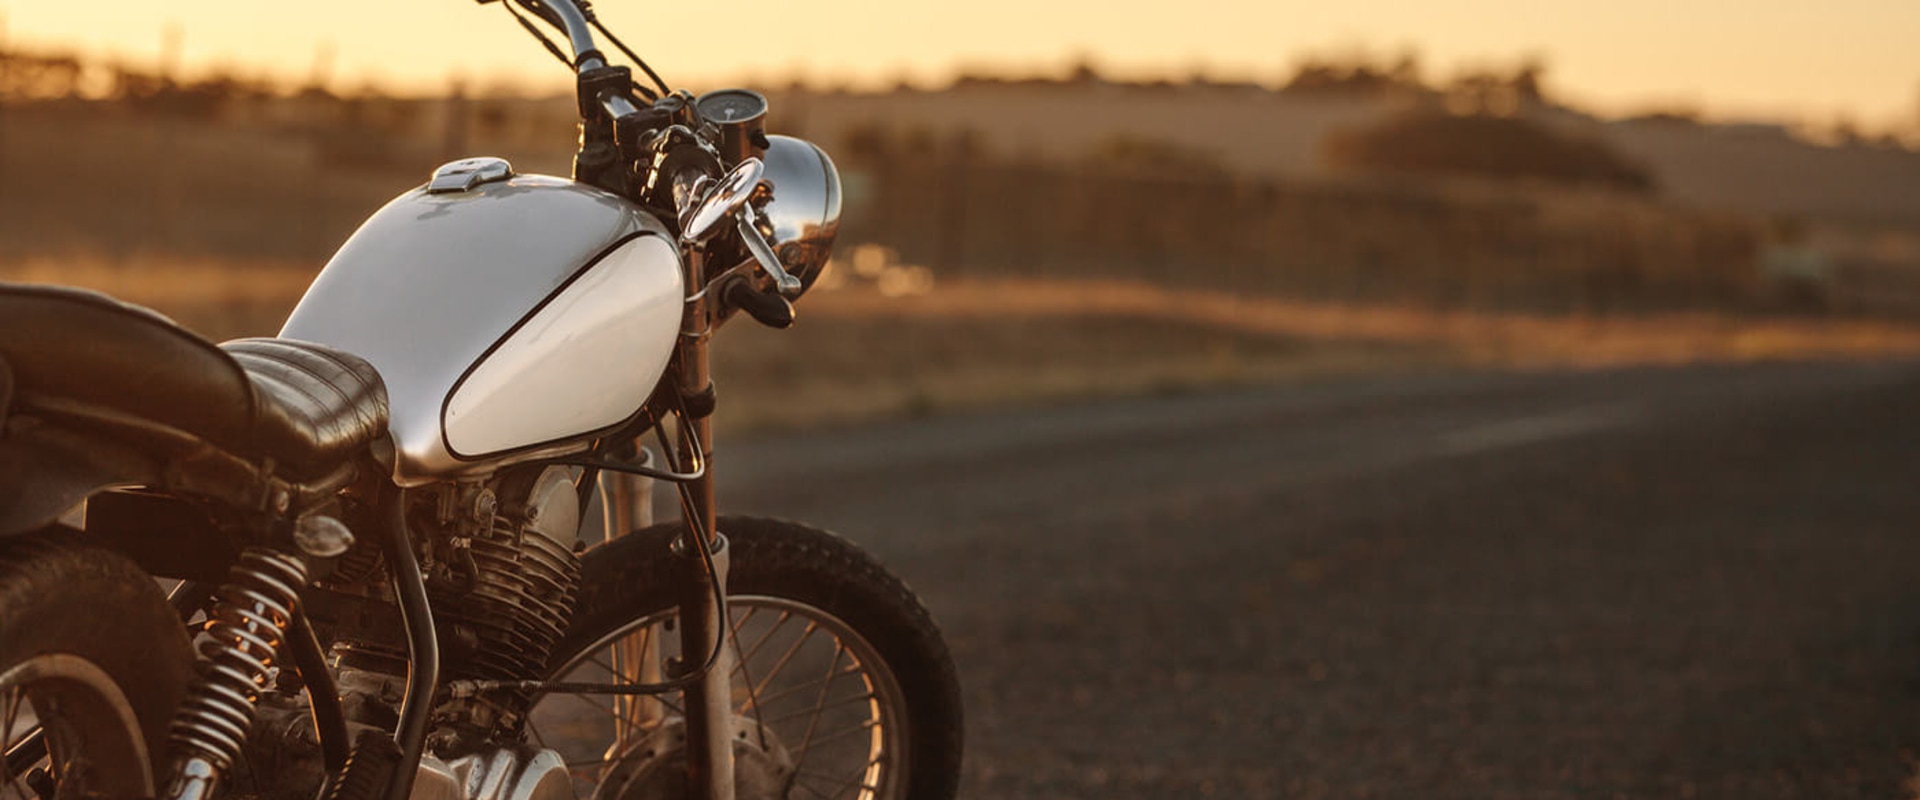 Does Motorcycle Insurance Cover Vintage Bikes?